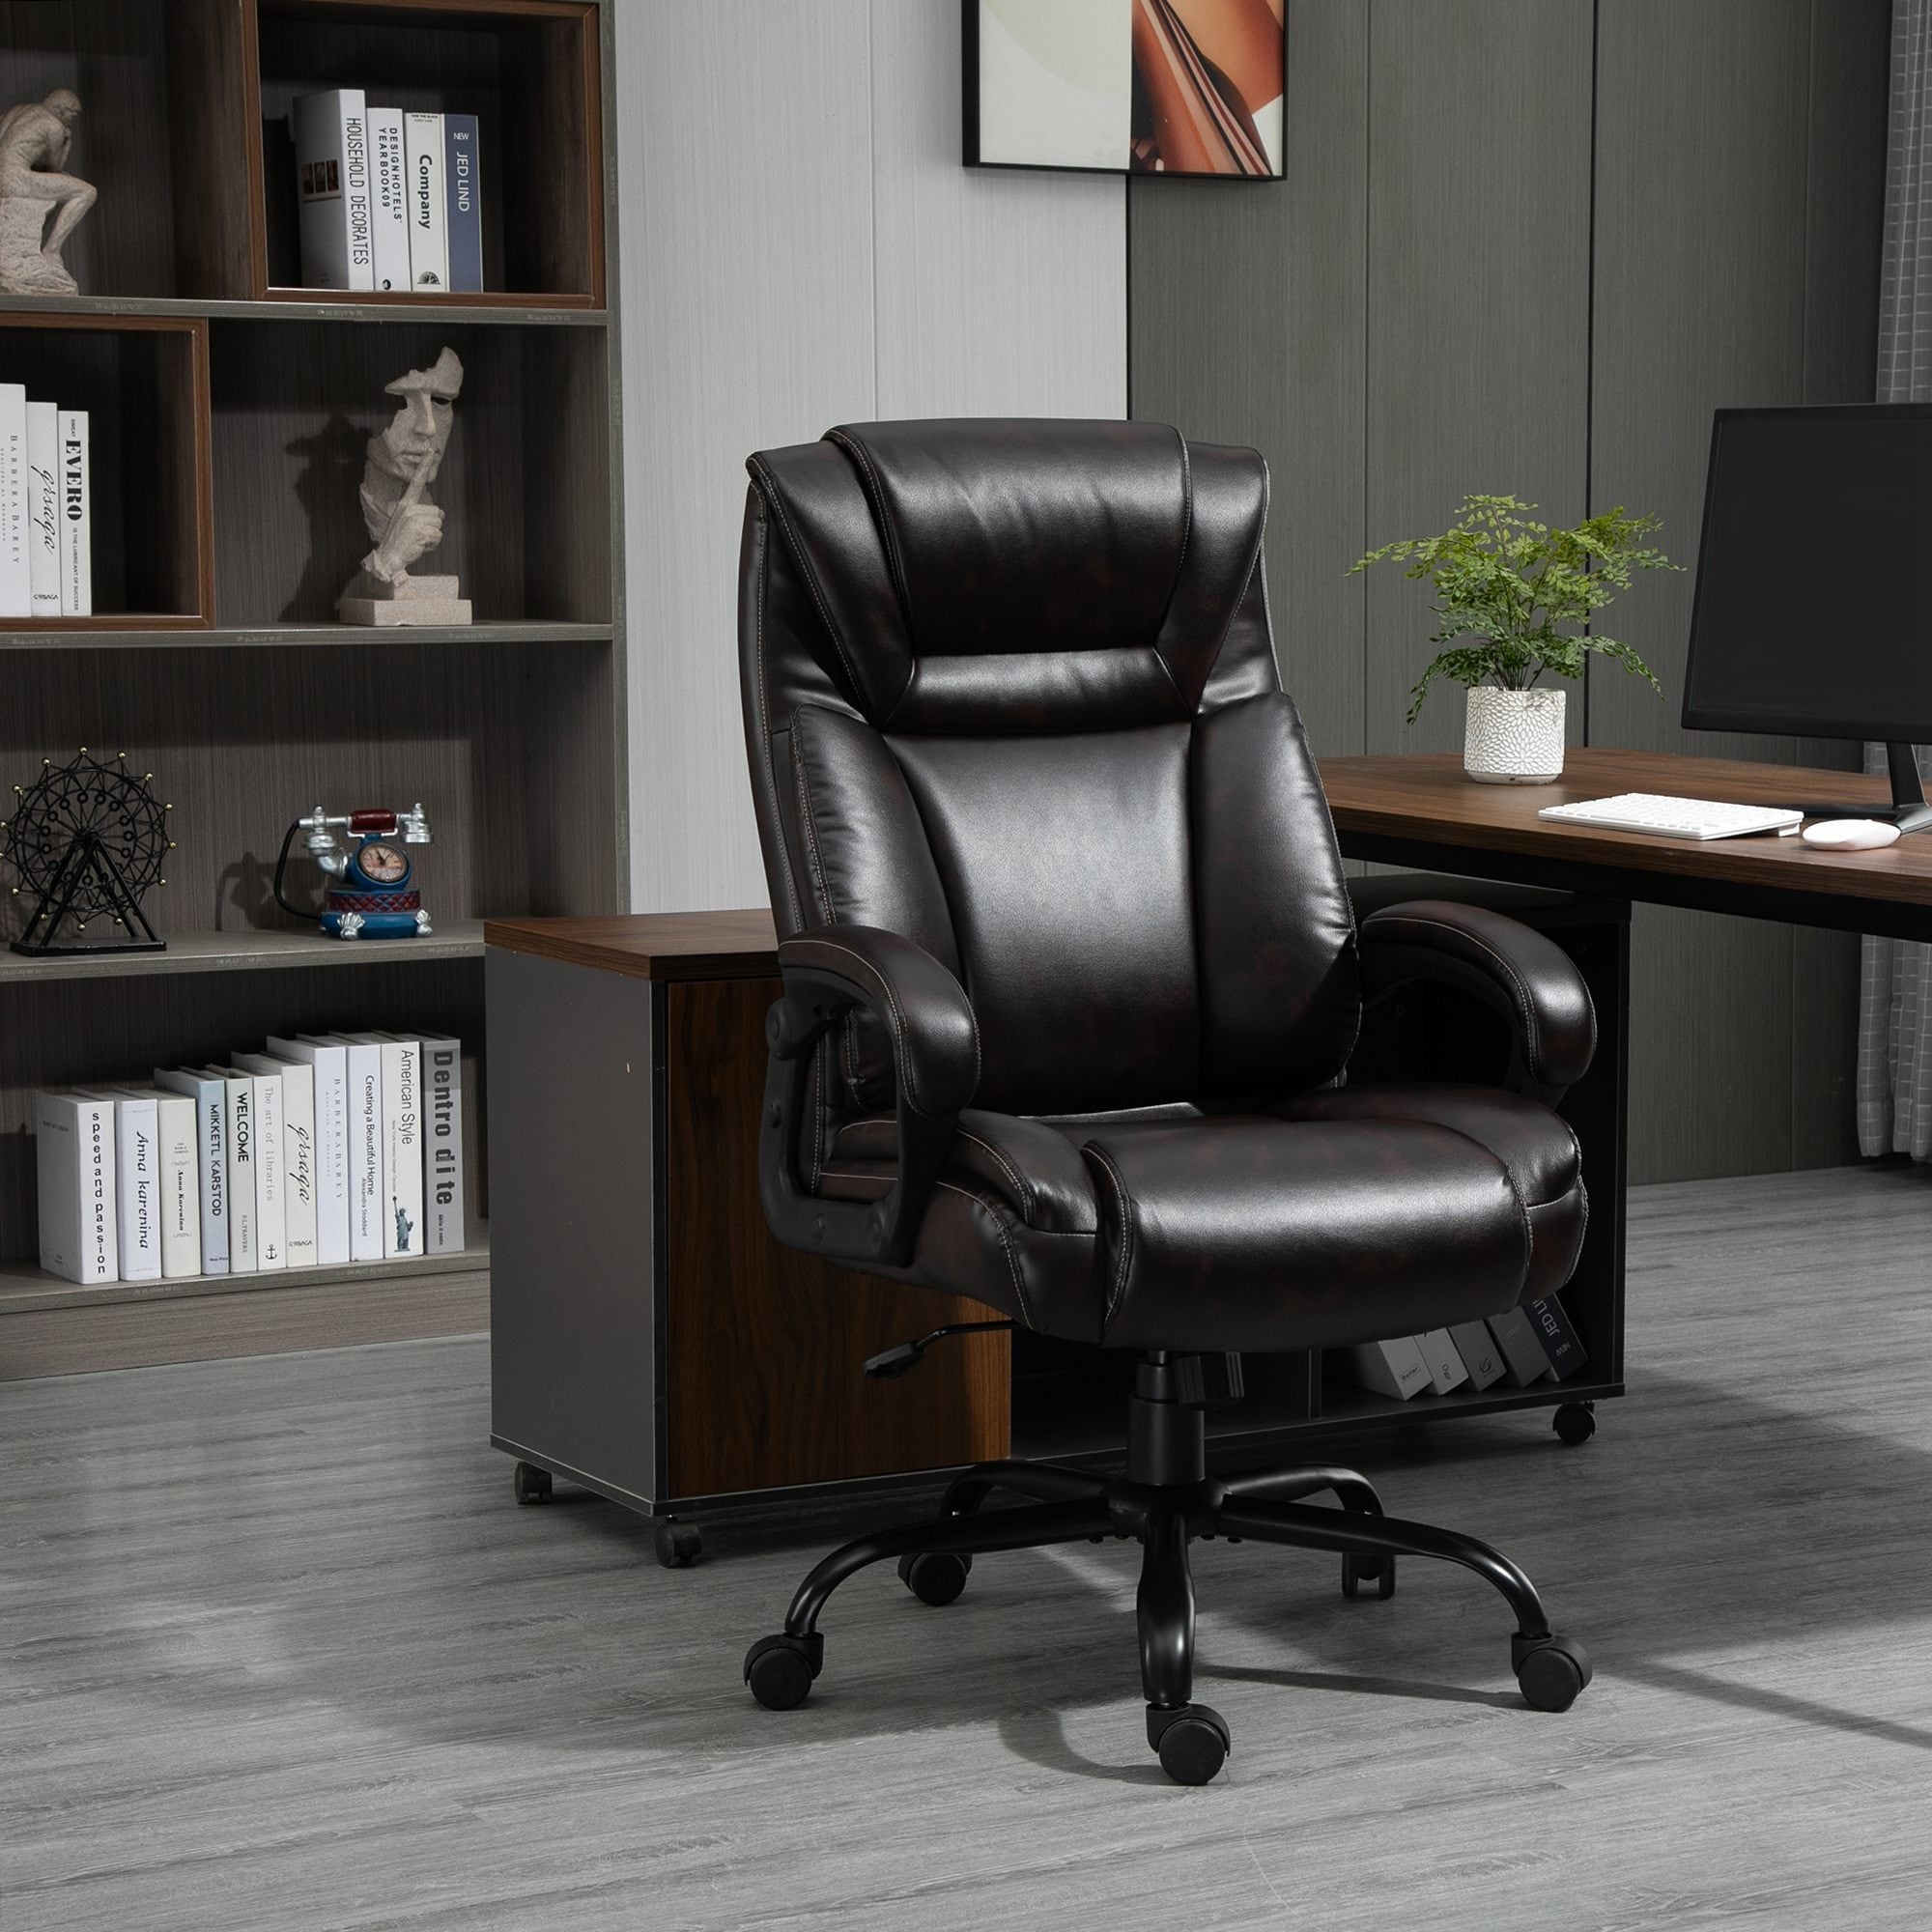 https://ak1.ostkcdn.com/images/products/is/images/direct/86f0c0e646d78c69c460fce84e843916ca132b94/Vinsetto-Big-and-Tall-Executive-Office-Chair-400lbs-Computer-Desk-Chair-with-High-Back-PU-Leather-Ergonomic-Upholstery.jpg